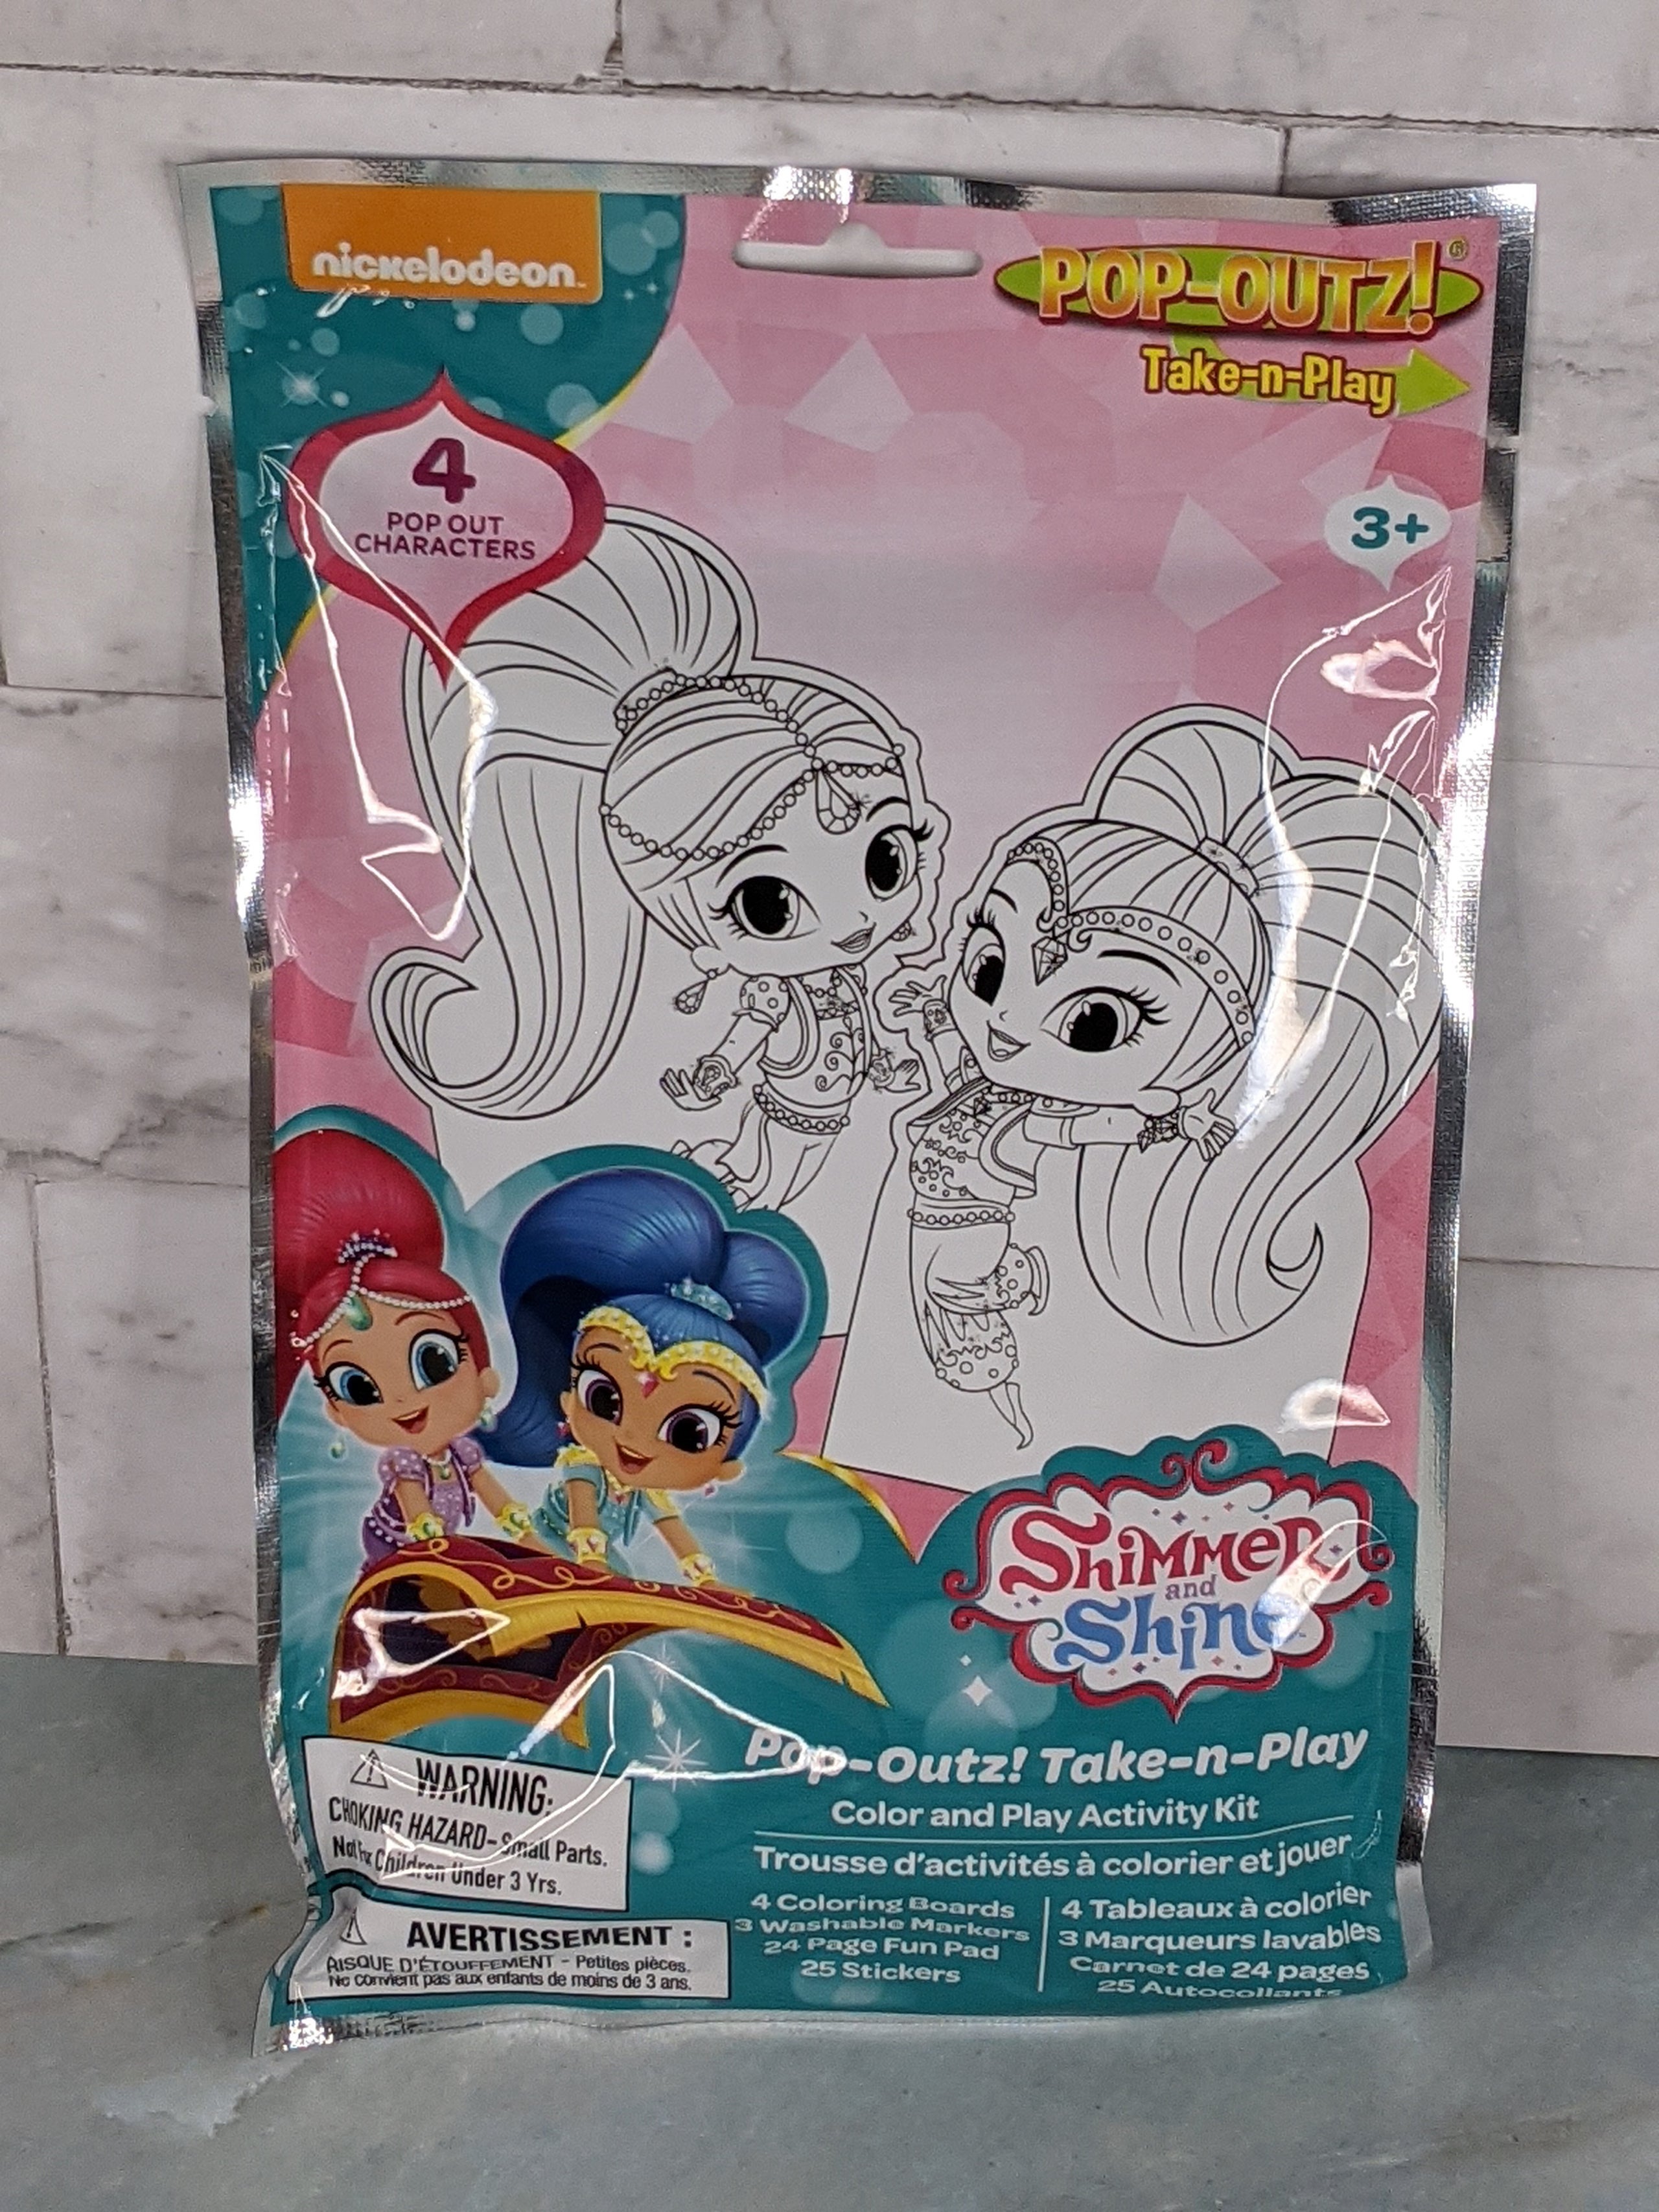 ader Spectaculair Voorspeller Shimmer and Shine Pop-Outz! Take-n-Play